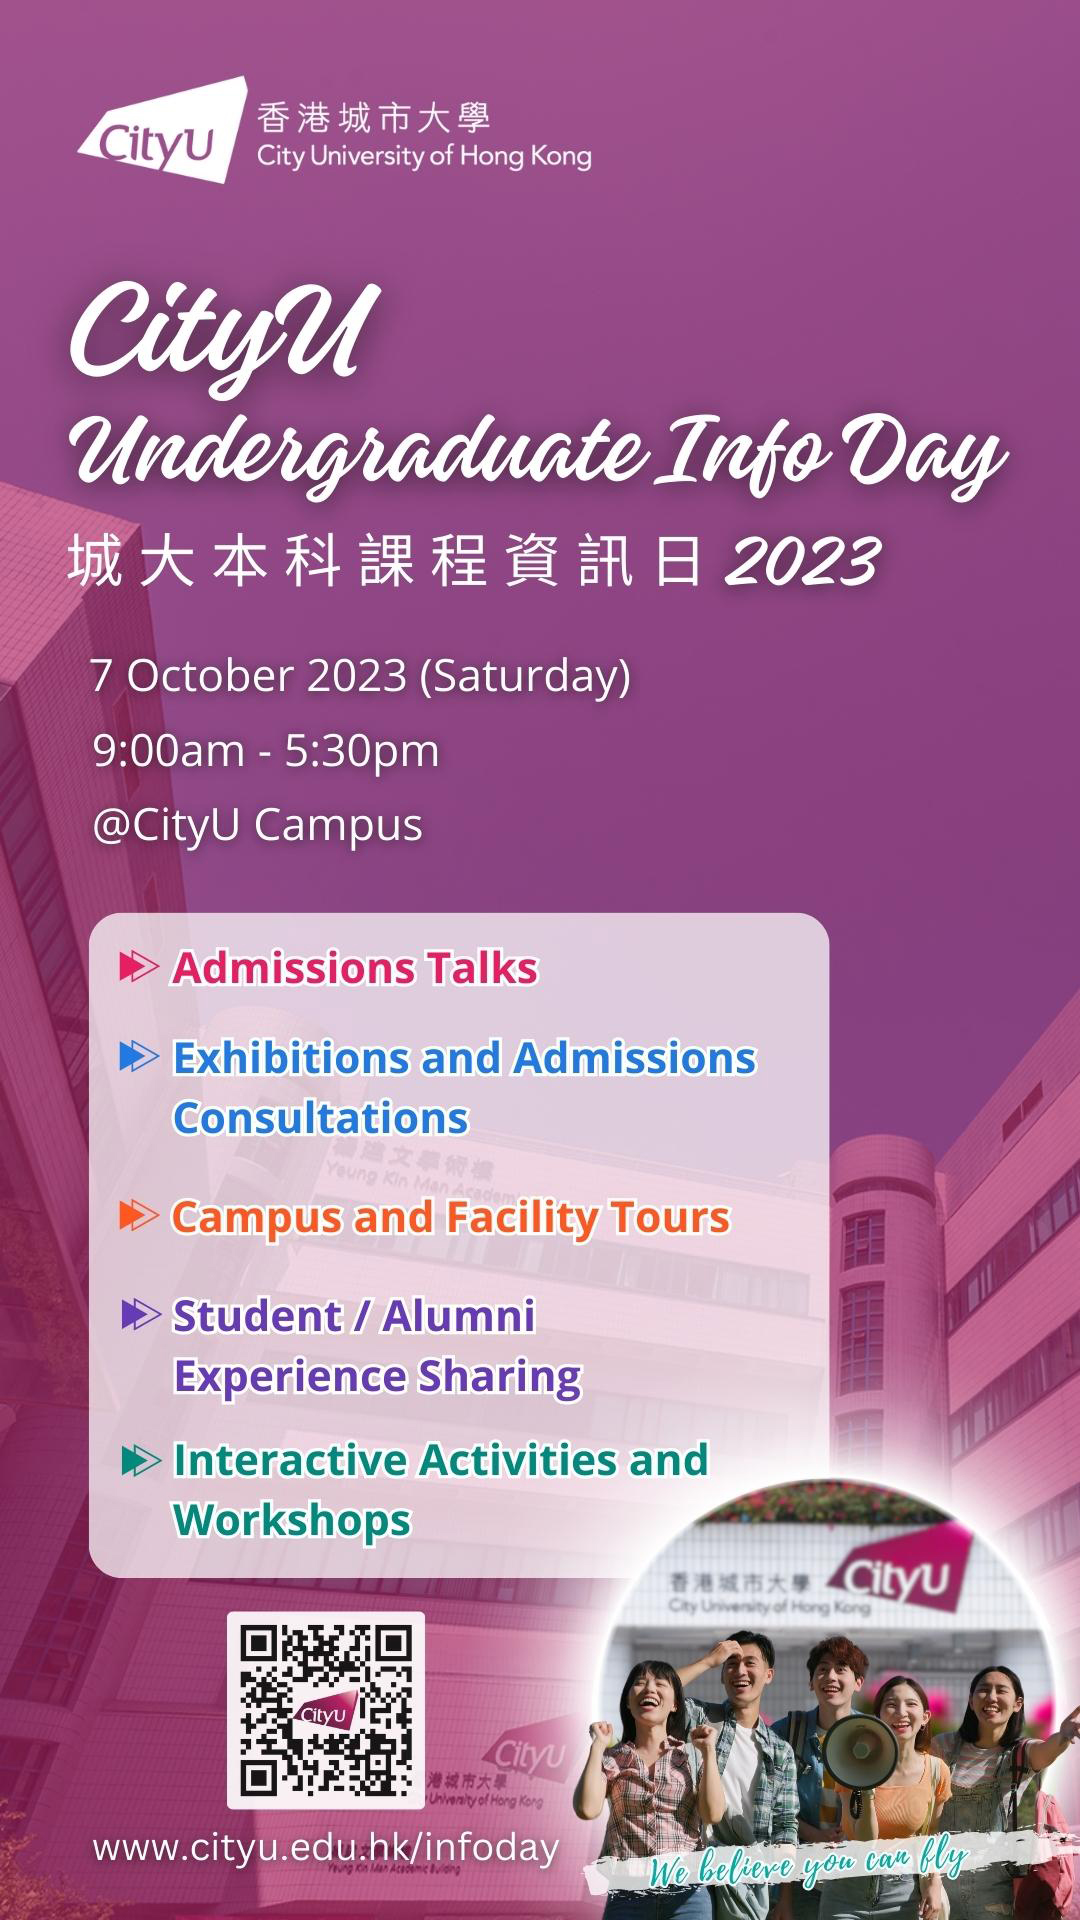 “CityU Undergraduate Info Day 2023” will be held on Saturday, 7 October 2023 from 9:00am to 5:30pm. This is a valuable chance for prospective students and the public to know more about our undergraduate programmes and university life. Event Highlights: Admissions Talks Exhibitions and Admissions Consultations Campus and Facility Tours Student / Alumni Experience Sharing Interactive Activities and Workshops Details are available at the event website.